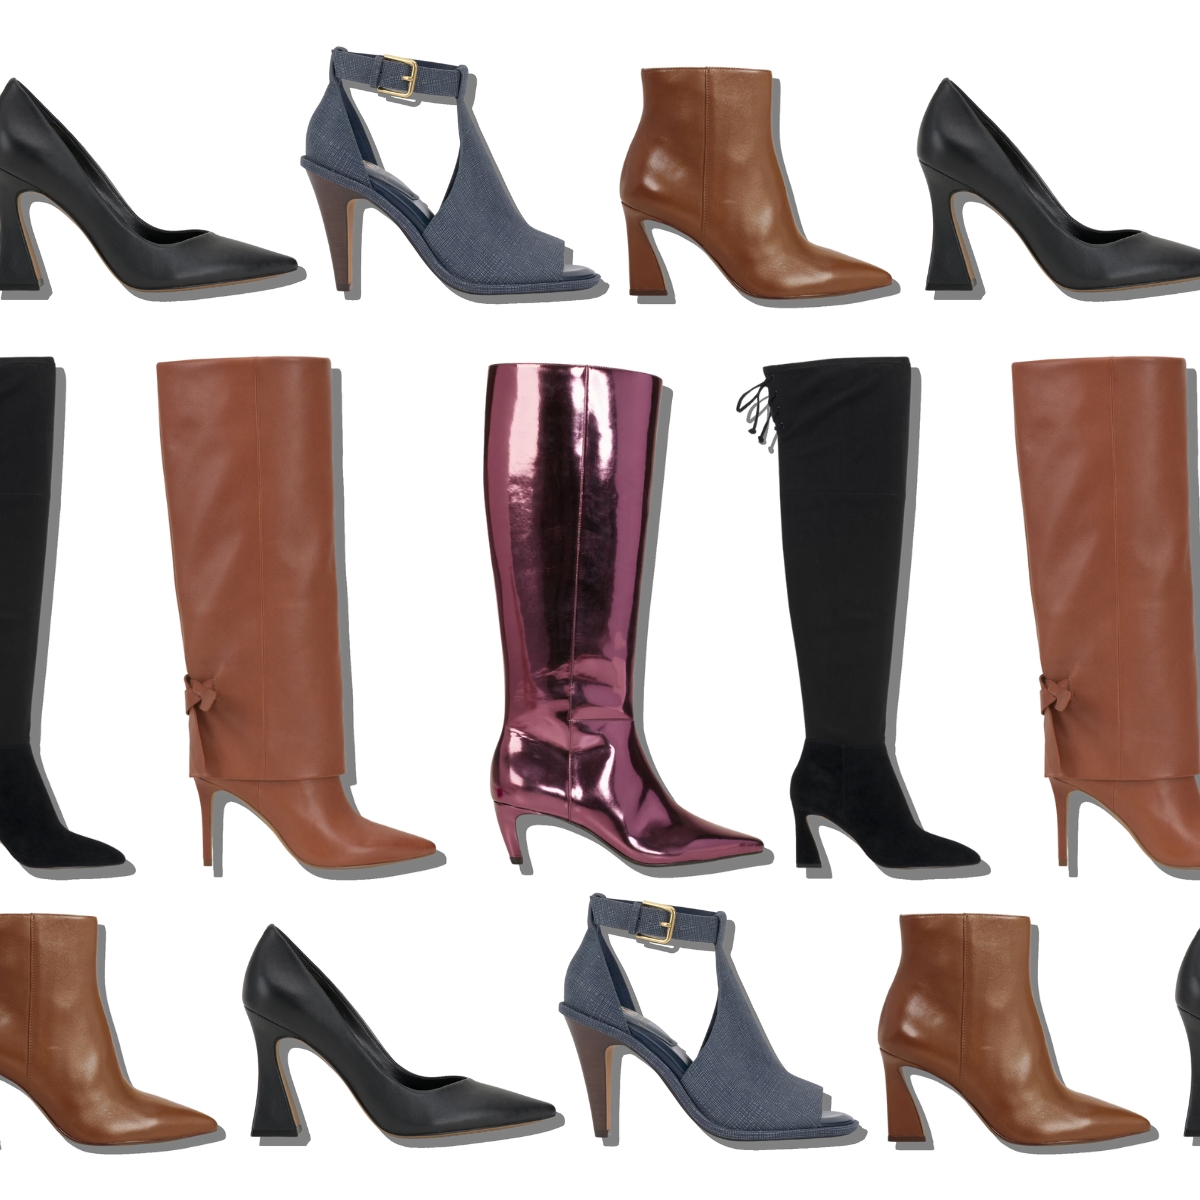 Hurry Up & Shop Vince Camuto's Shoe Sale With an Extra 50% Off Boots